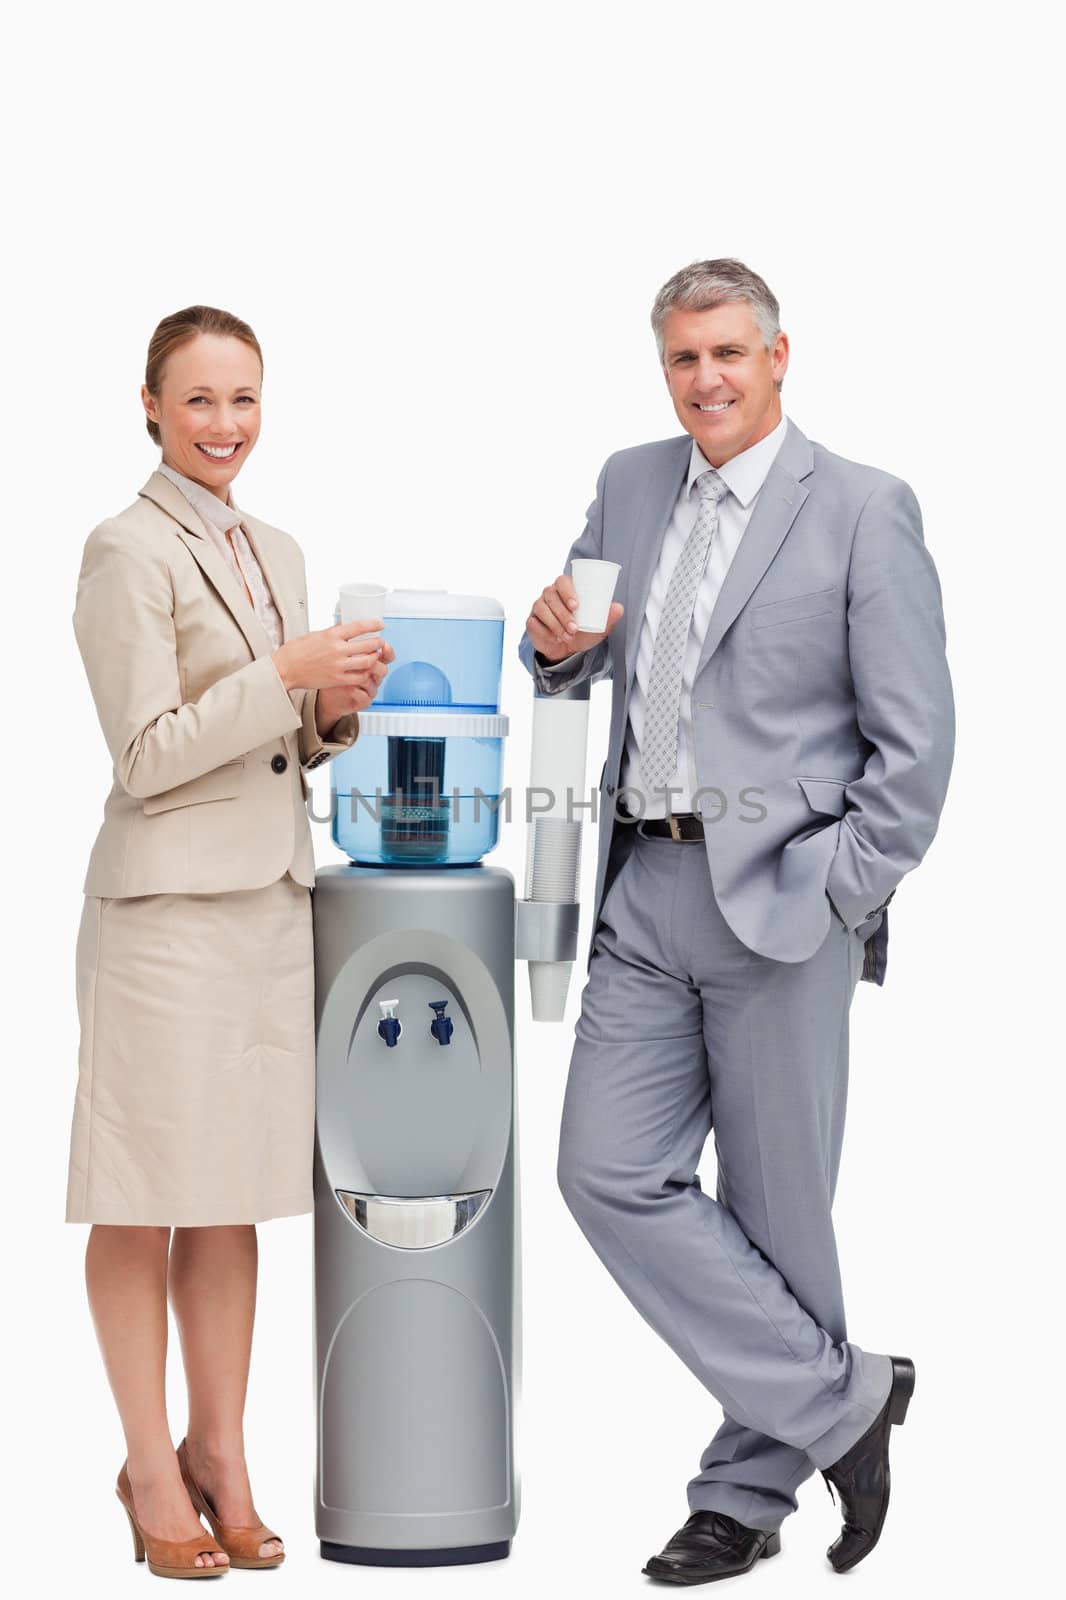 Portrait of smiling business people next to the water dispenser against white background